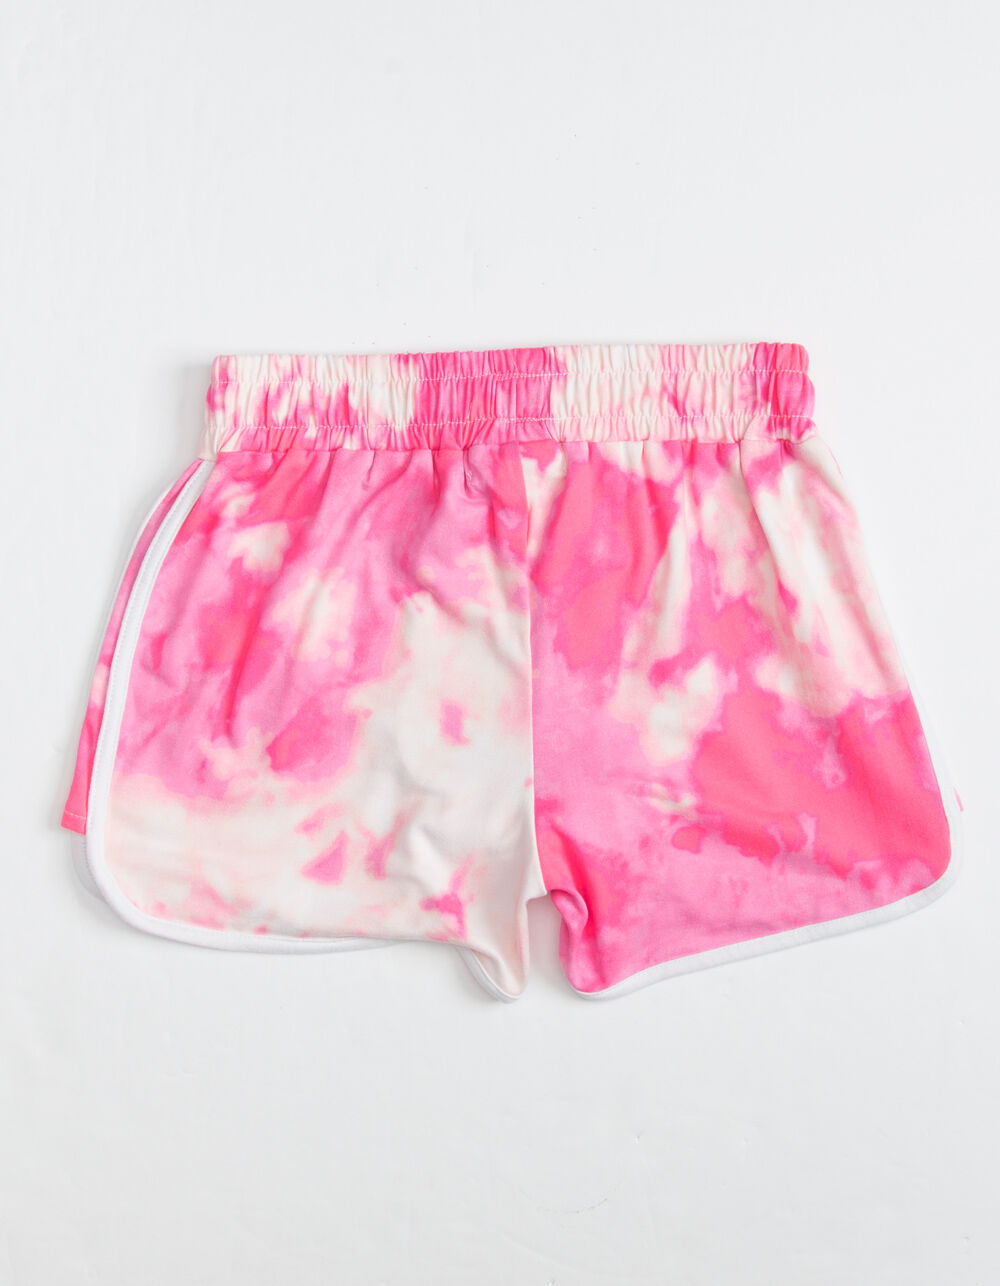 FULL CIRCLE TRENDS Tie Dye Contrast Piping Girls Shorts - PINK COMBO ...